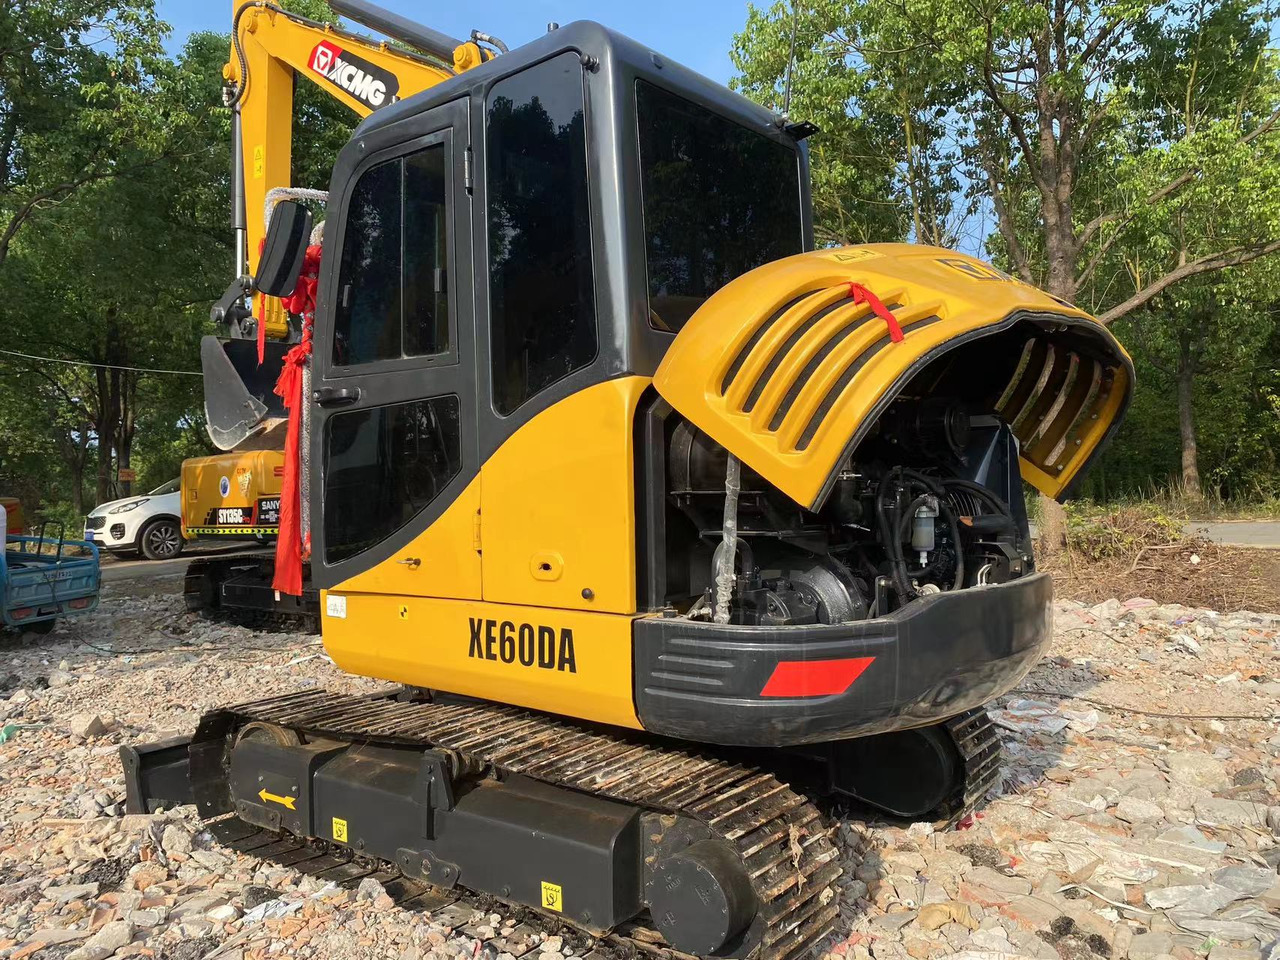 Pelle sur chenille Mini excavator XCMG XE60DA earth moving digger for sale: photos 7